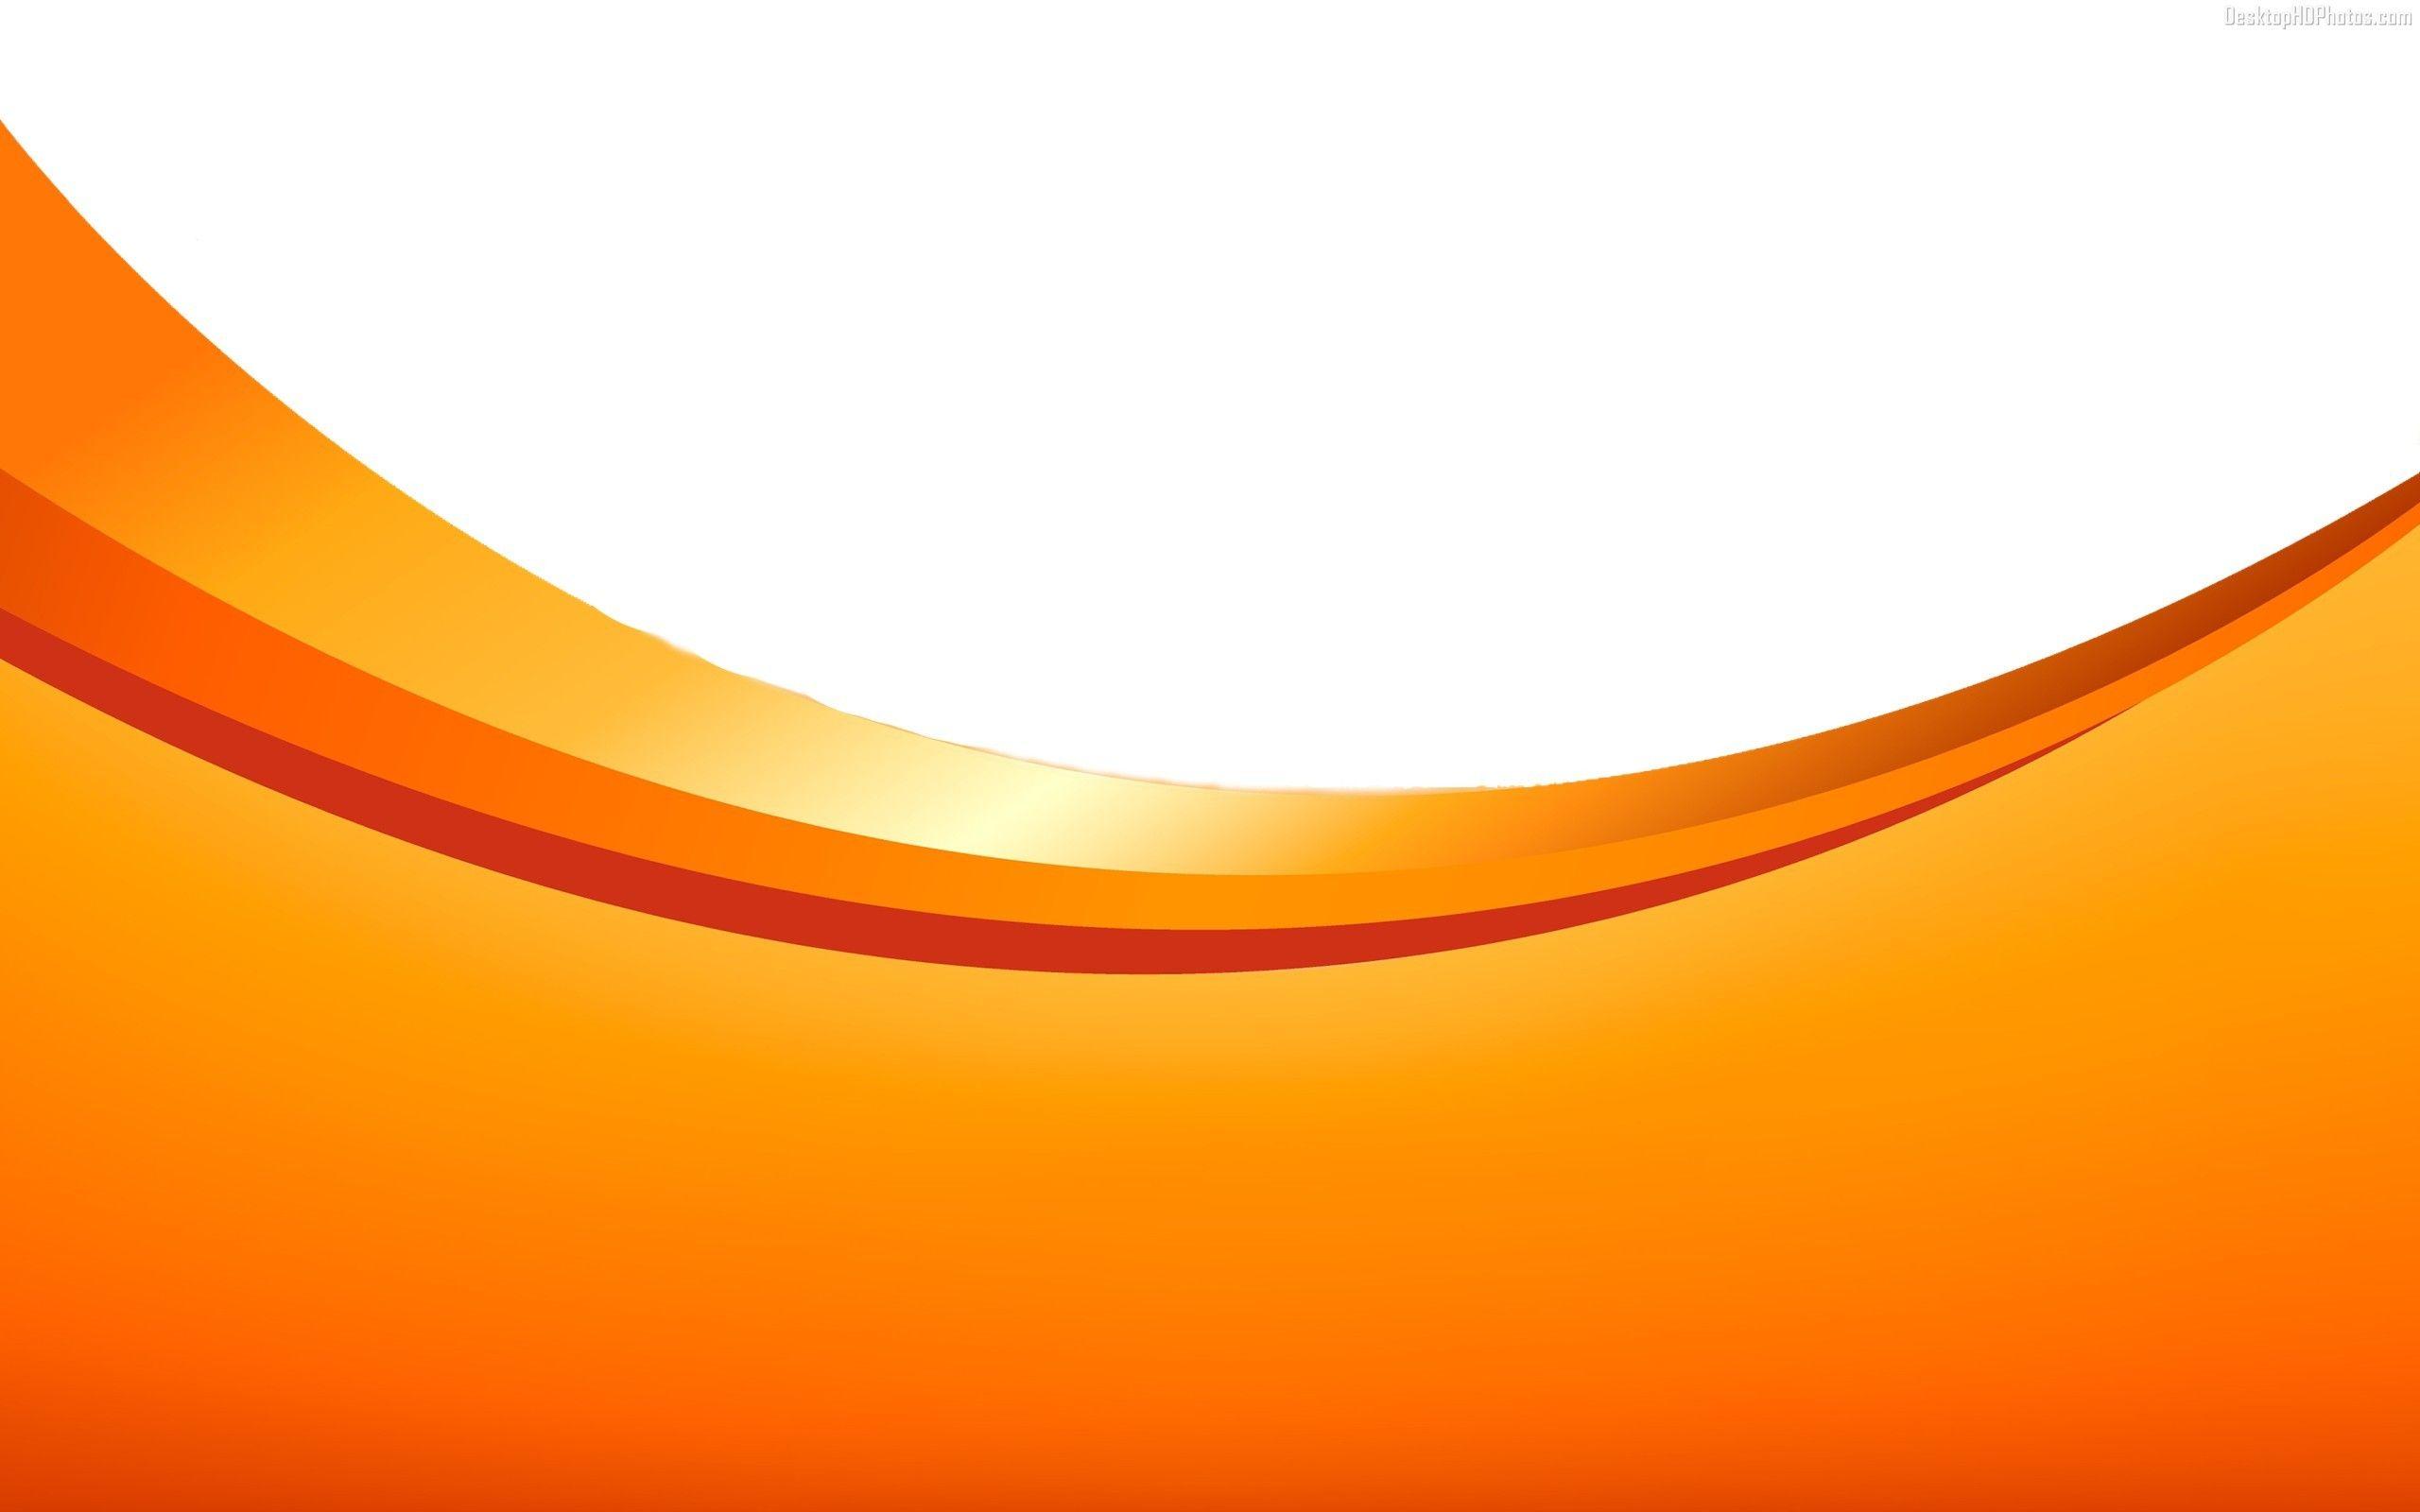 Orange Aesthetic Wallpapers and Backgrounds